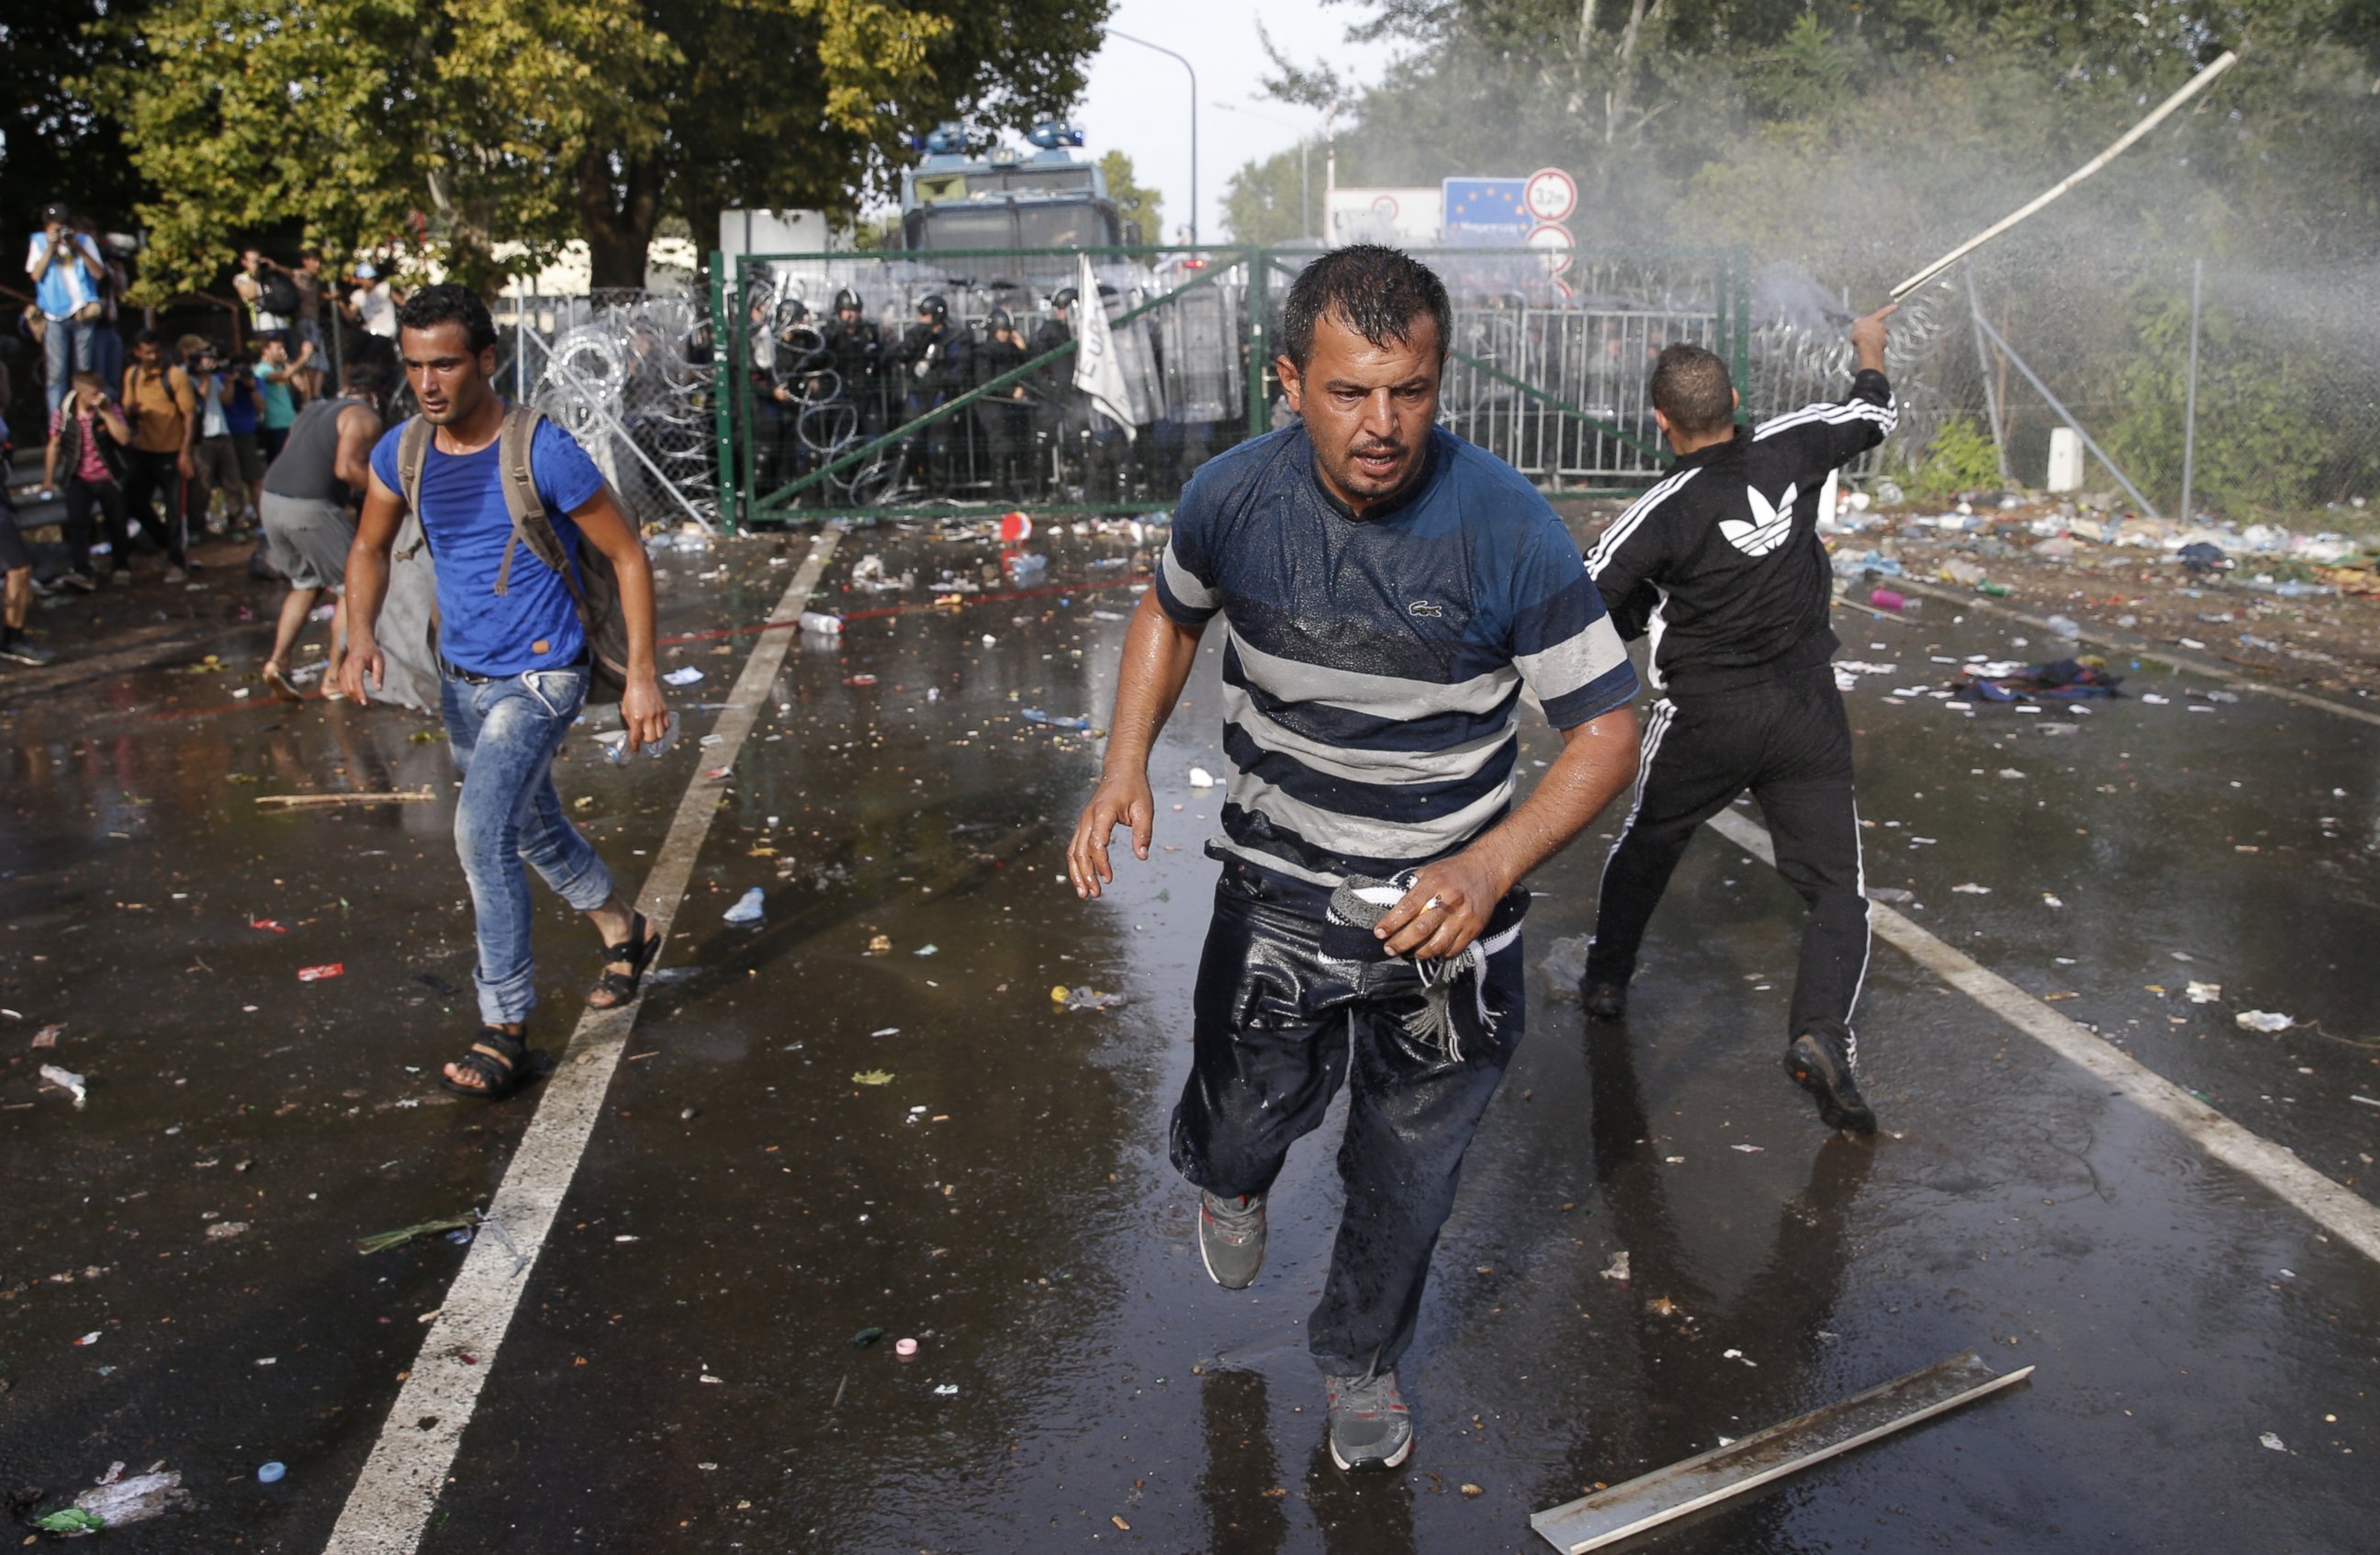 PHOTO: Migrants run as Hungarian riot police fires tear gas and water cannon at the border crossing with Serbia in Roszke, Hungary, Sept. 16, 2015.